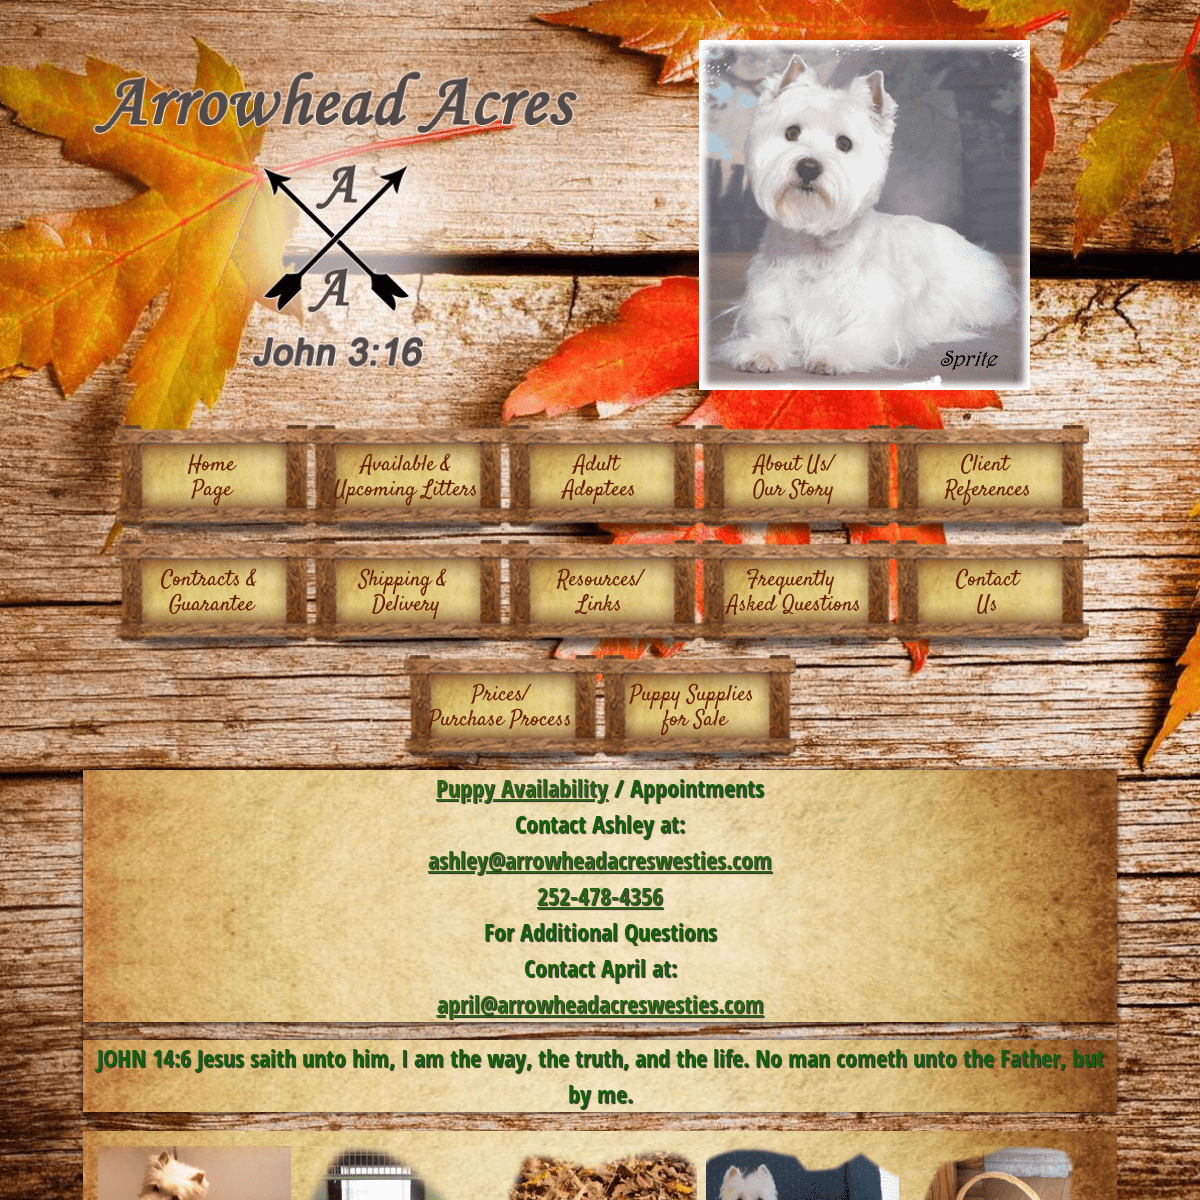 West Highland Terrier Puppies for Sale from Breeder | Arrowhead Acres